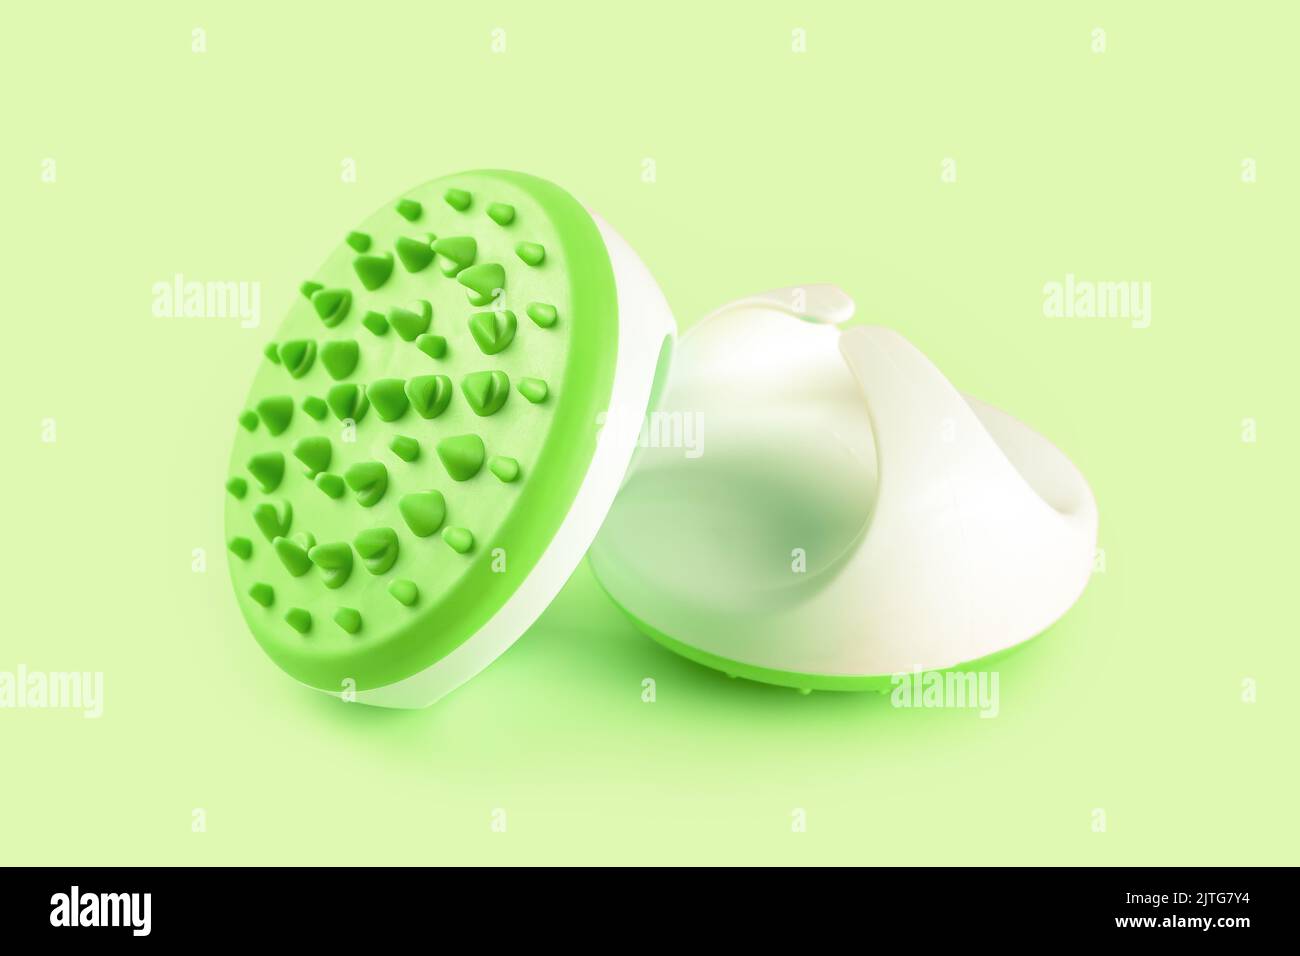 Hand massager with silicone spikes for anti-cellulite massage procedure isolated on green background. Massage brush tool for problem body zone, self-c Stock Photo